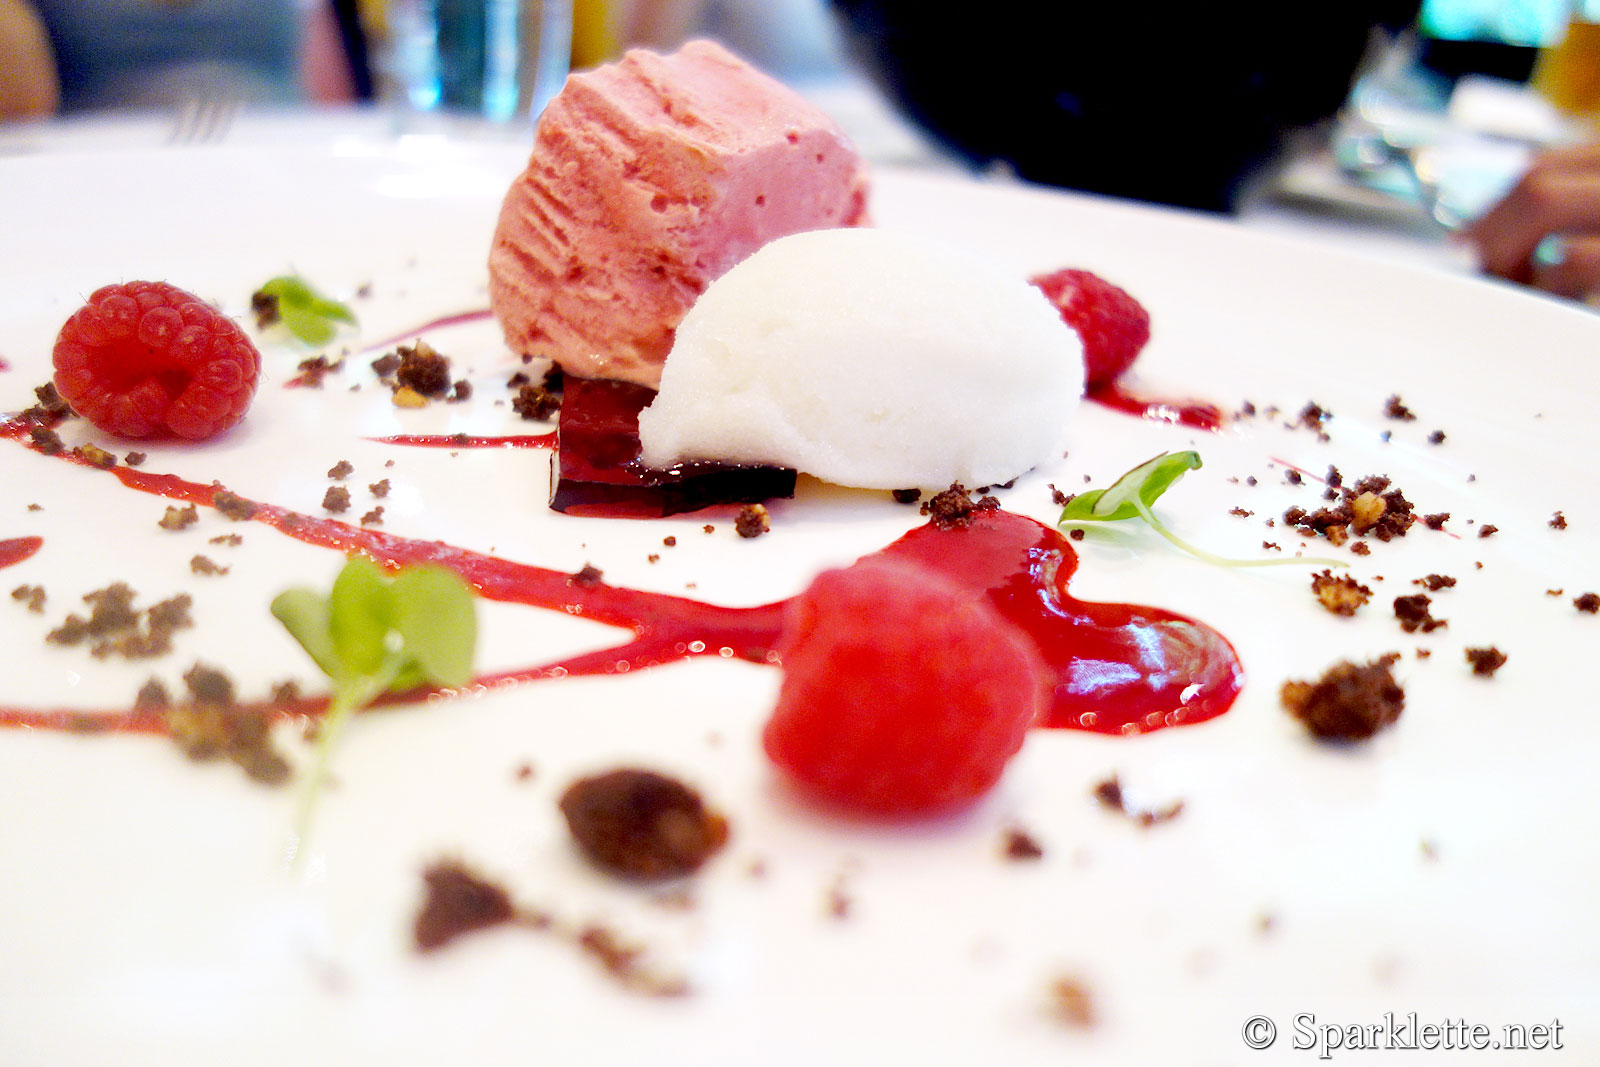 Raspberry, strawberry parfait, lychee & rose sorbet, chocolate crumble, red wine jelly